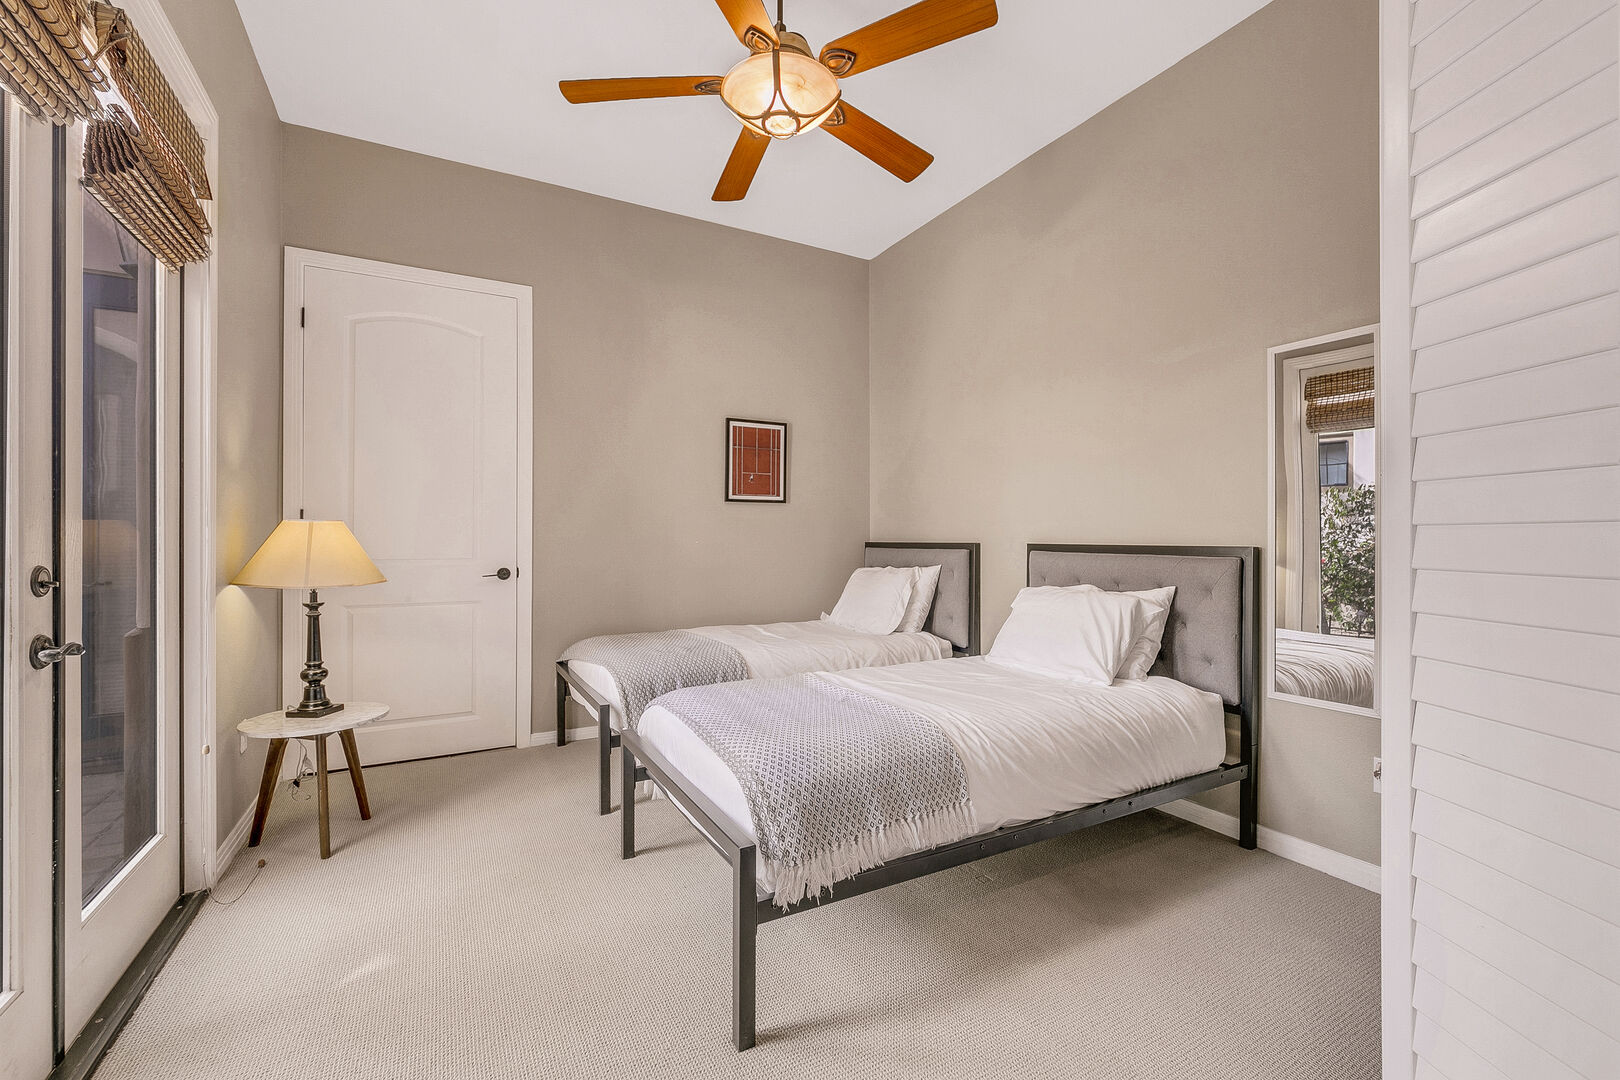 Bedroom 6 is located by master bedroom and features two Twin-sized Beds, remote-controlled ceiling fan, and reach-in closet and dual hanging clothing rod with access to the front courtyard.